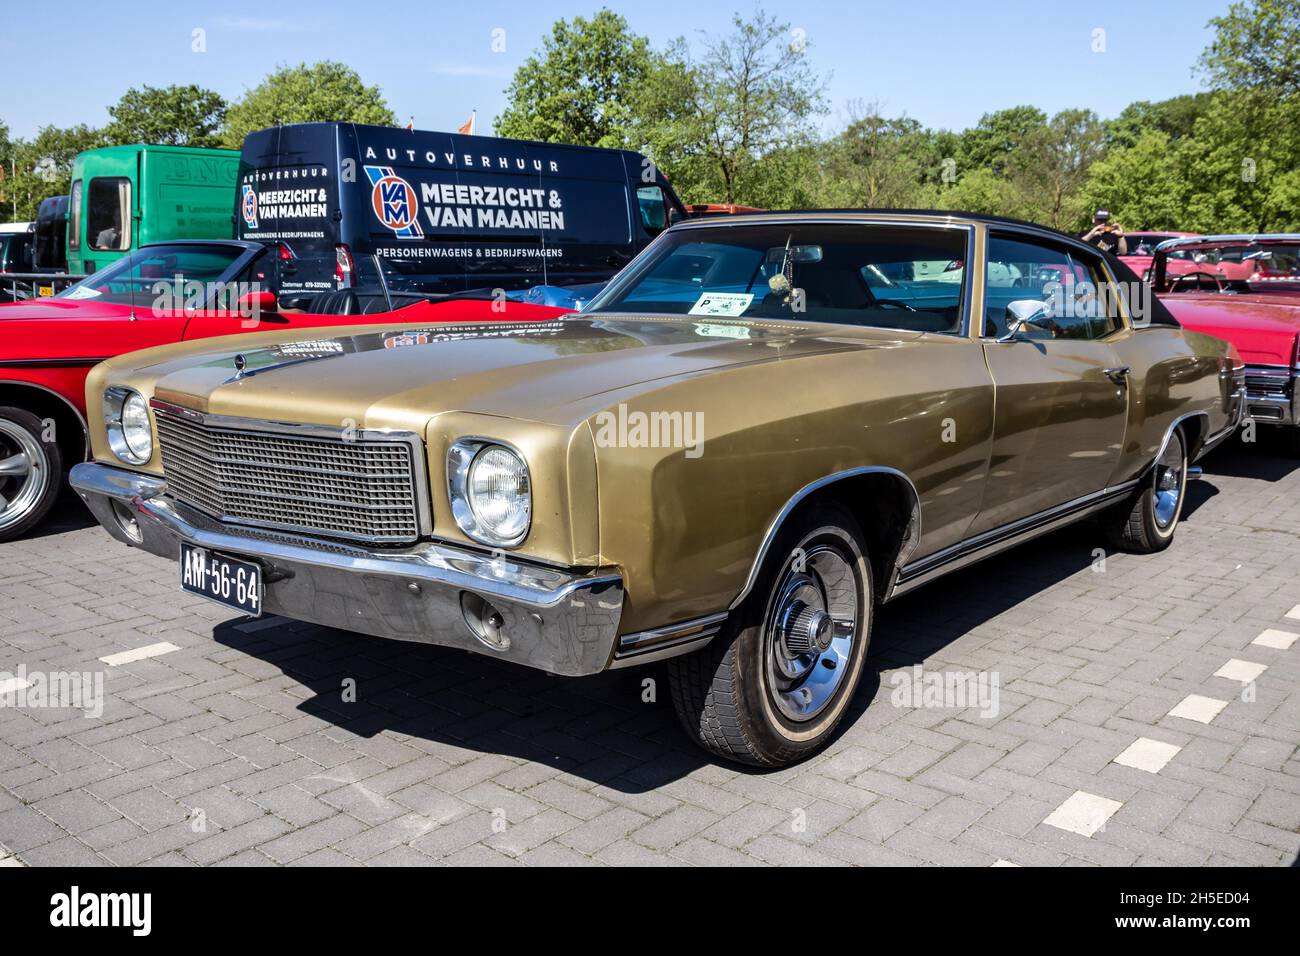 1970 Chevrolet Monte Carlo classic car on the parking lot. Rosmalen, The Netherlands - May 8, 2016 Stock Photo